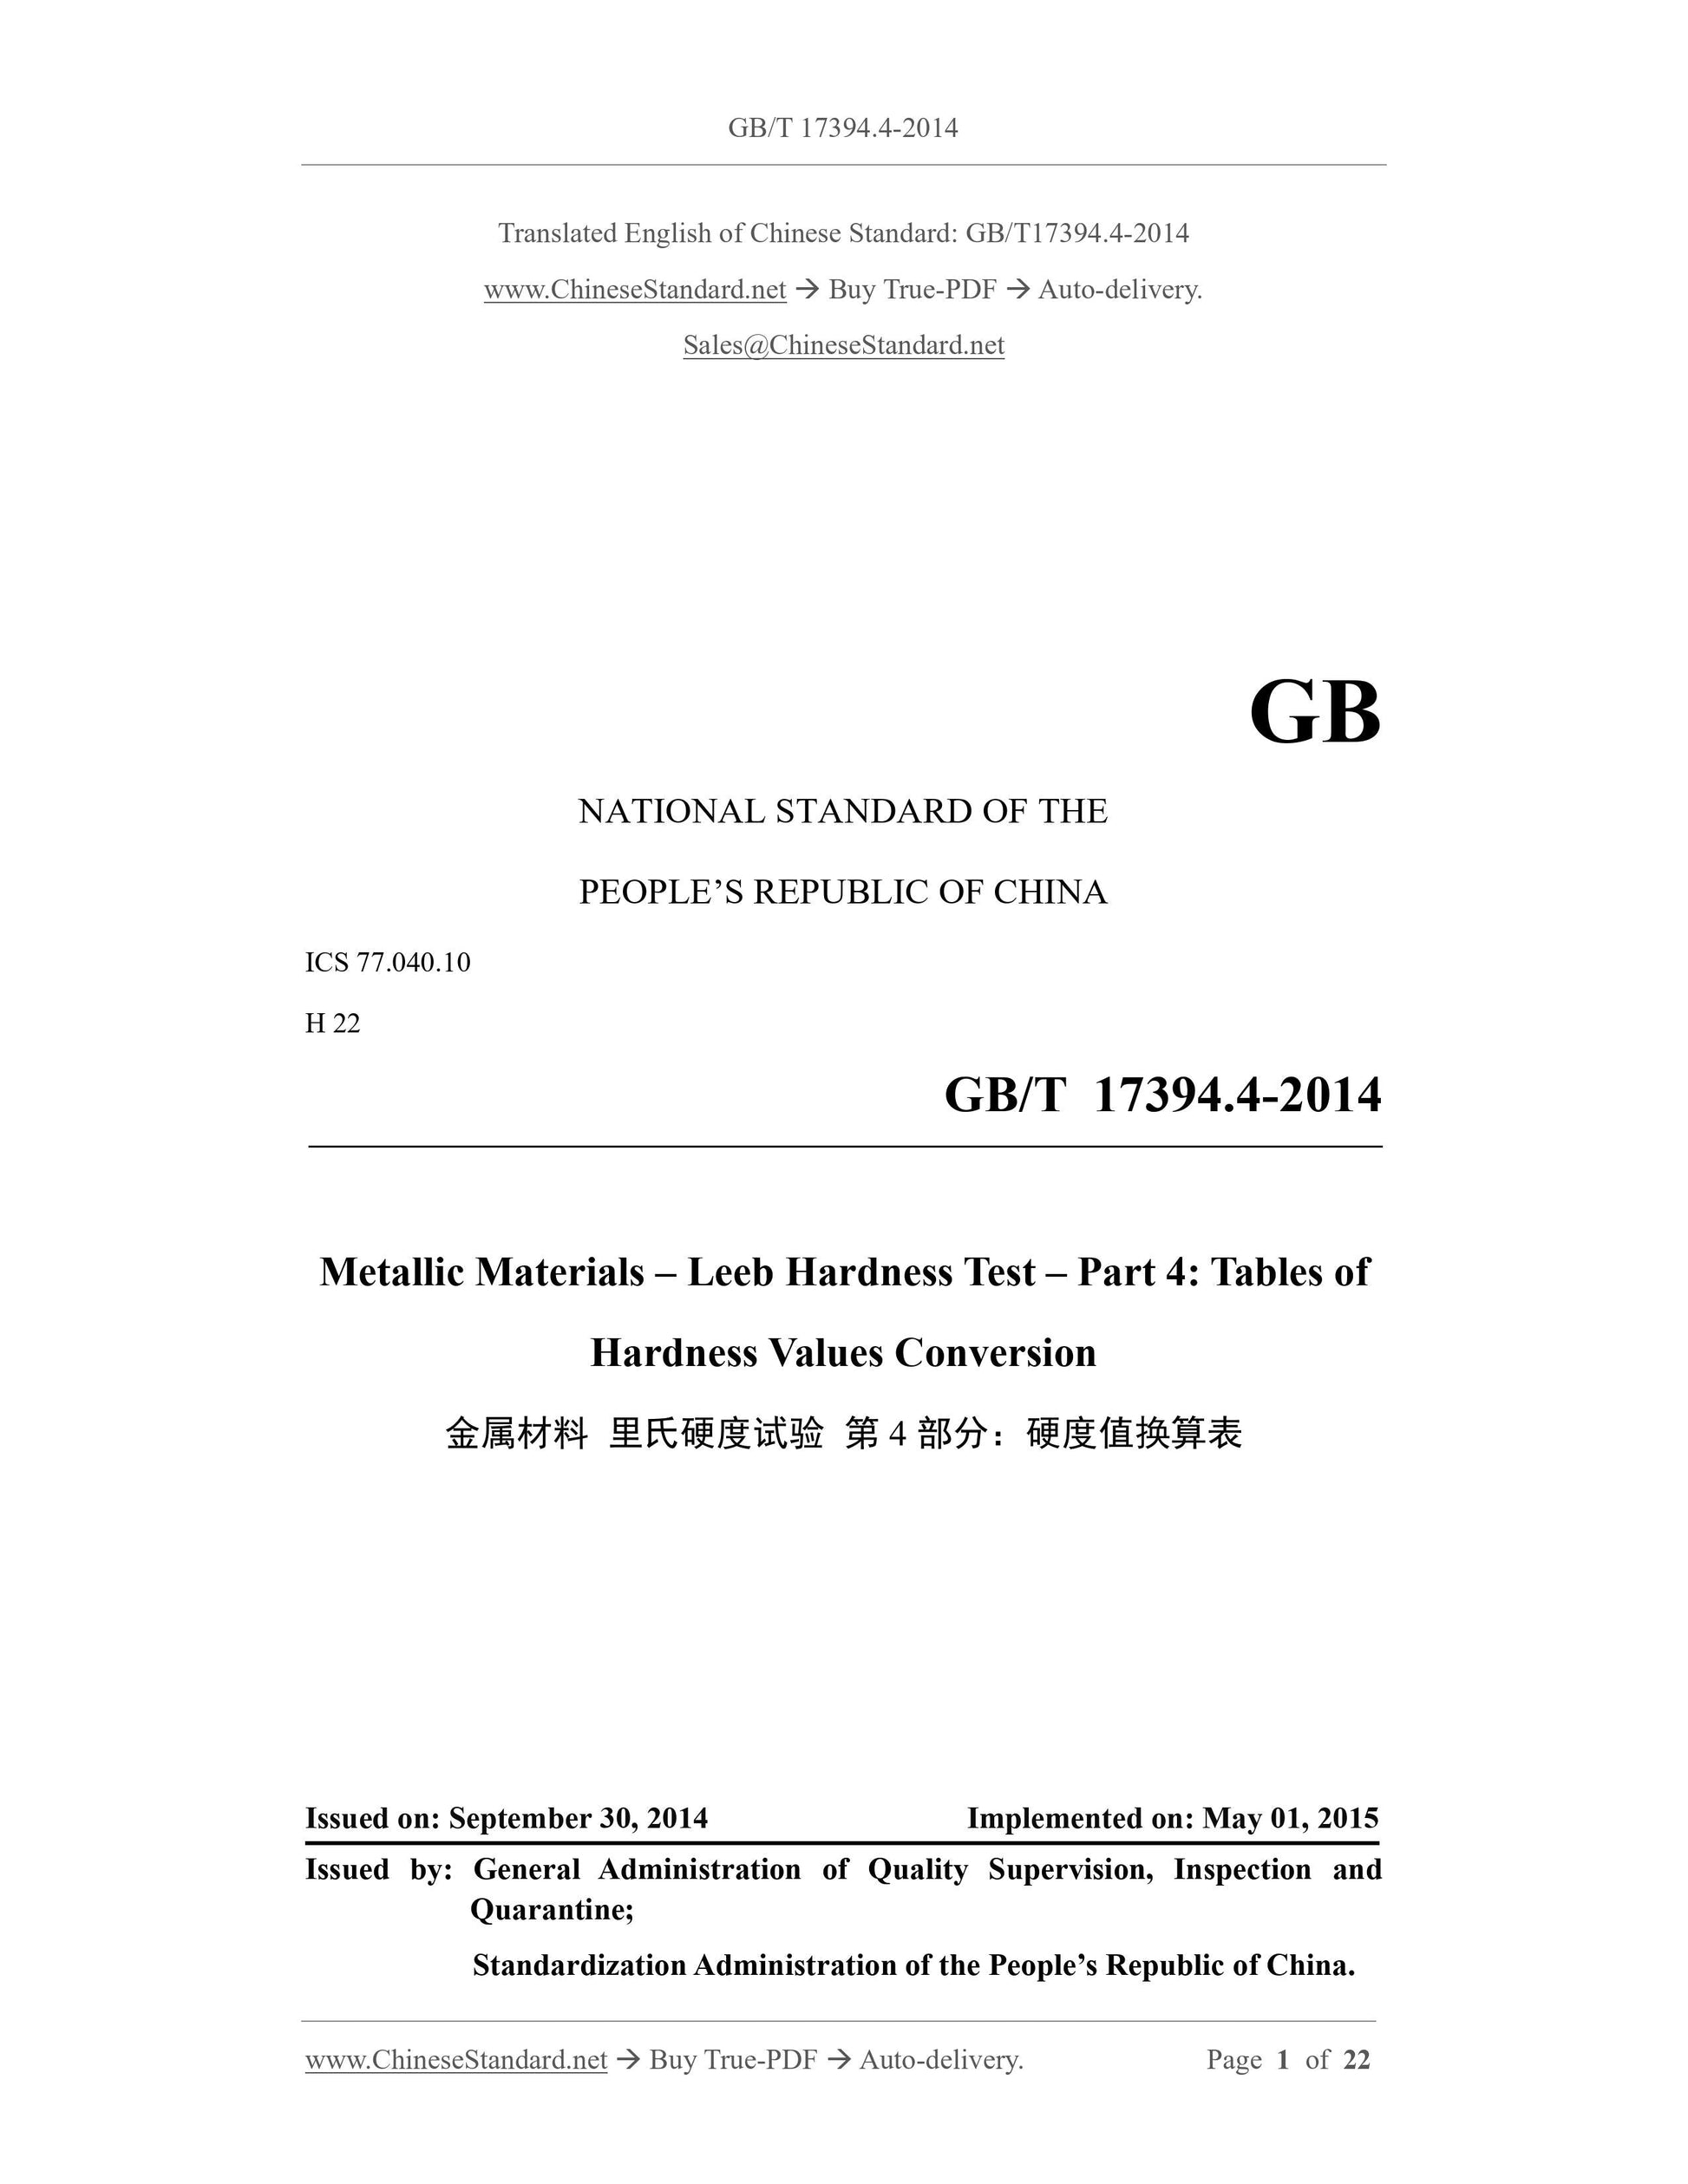 GB/T 17394.4-2014 Page 1